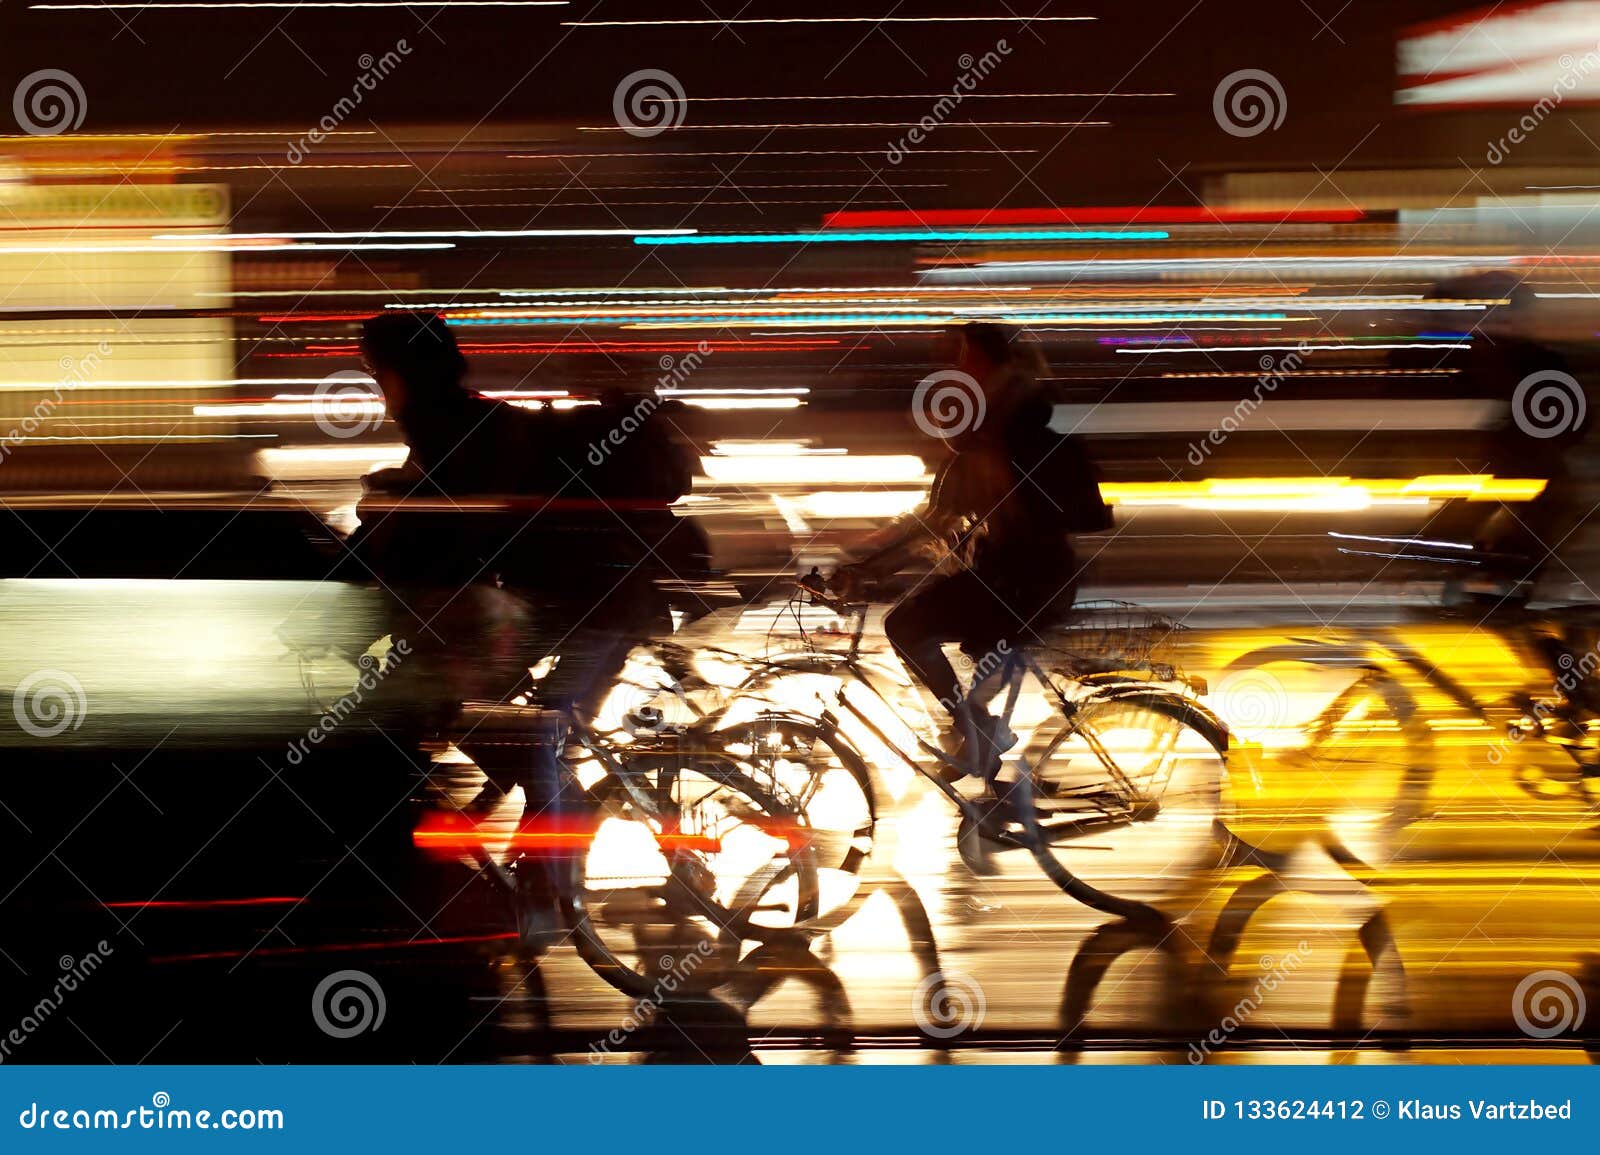 rushhour with cyclists at night